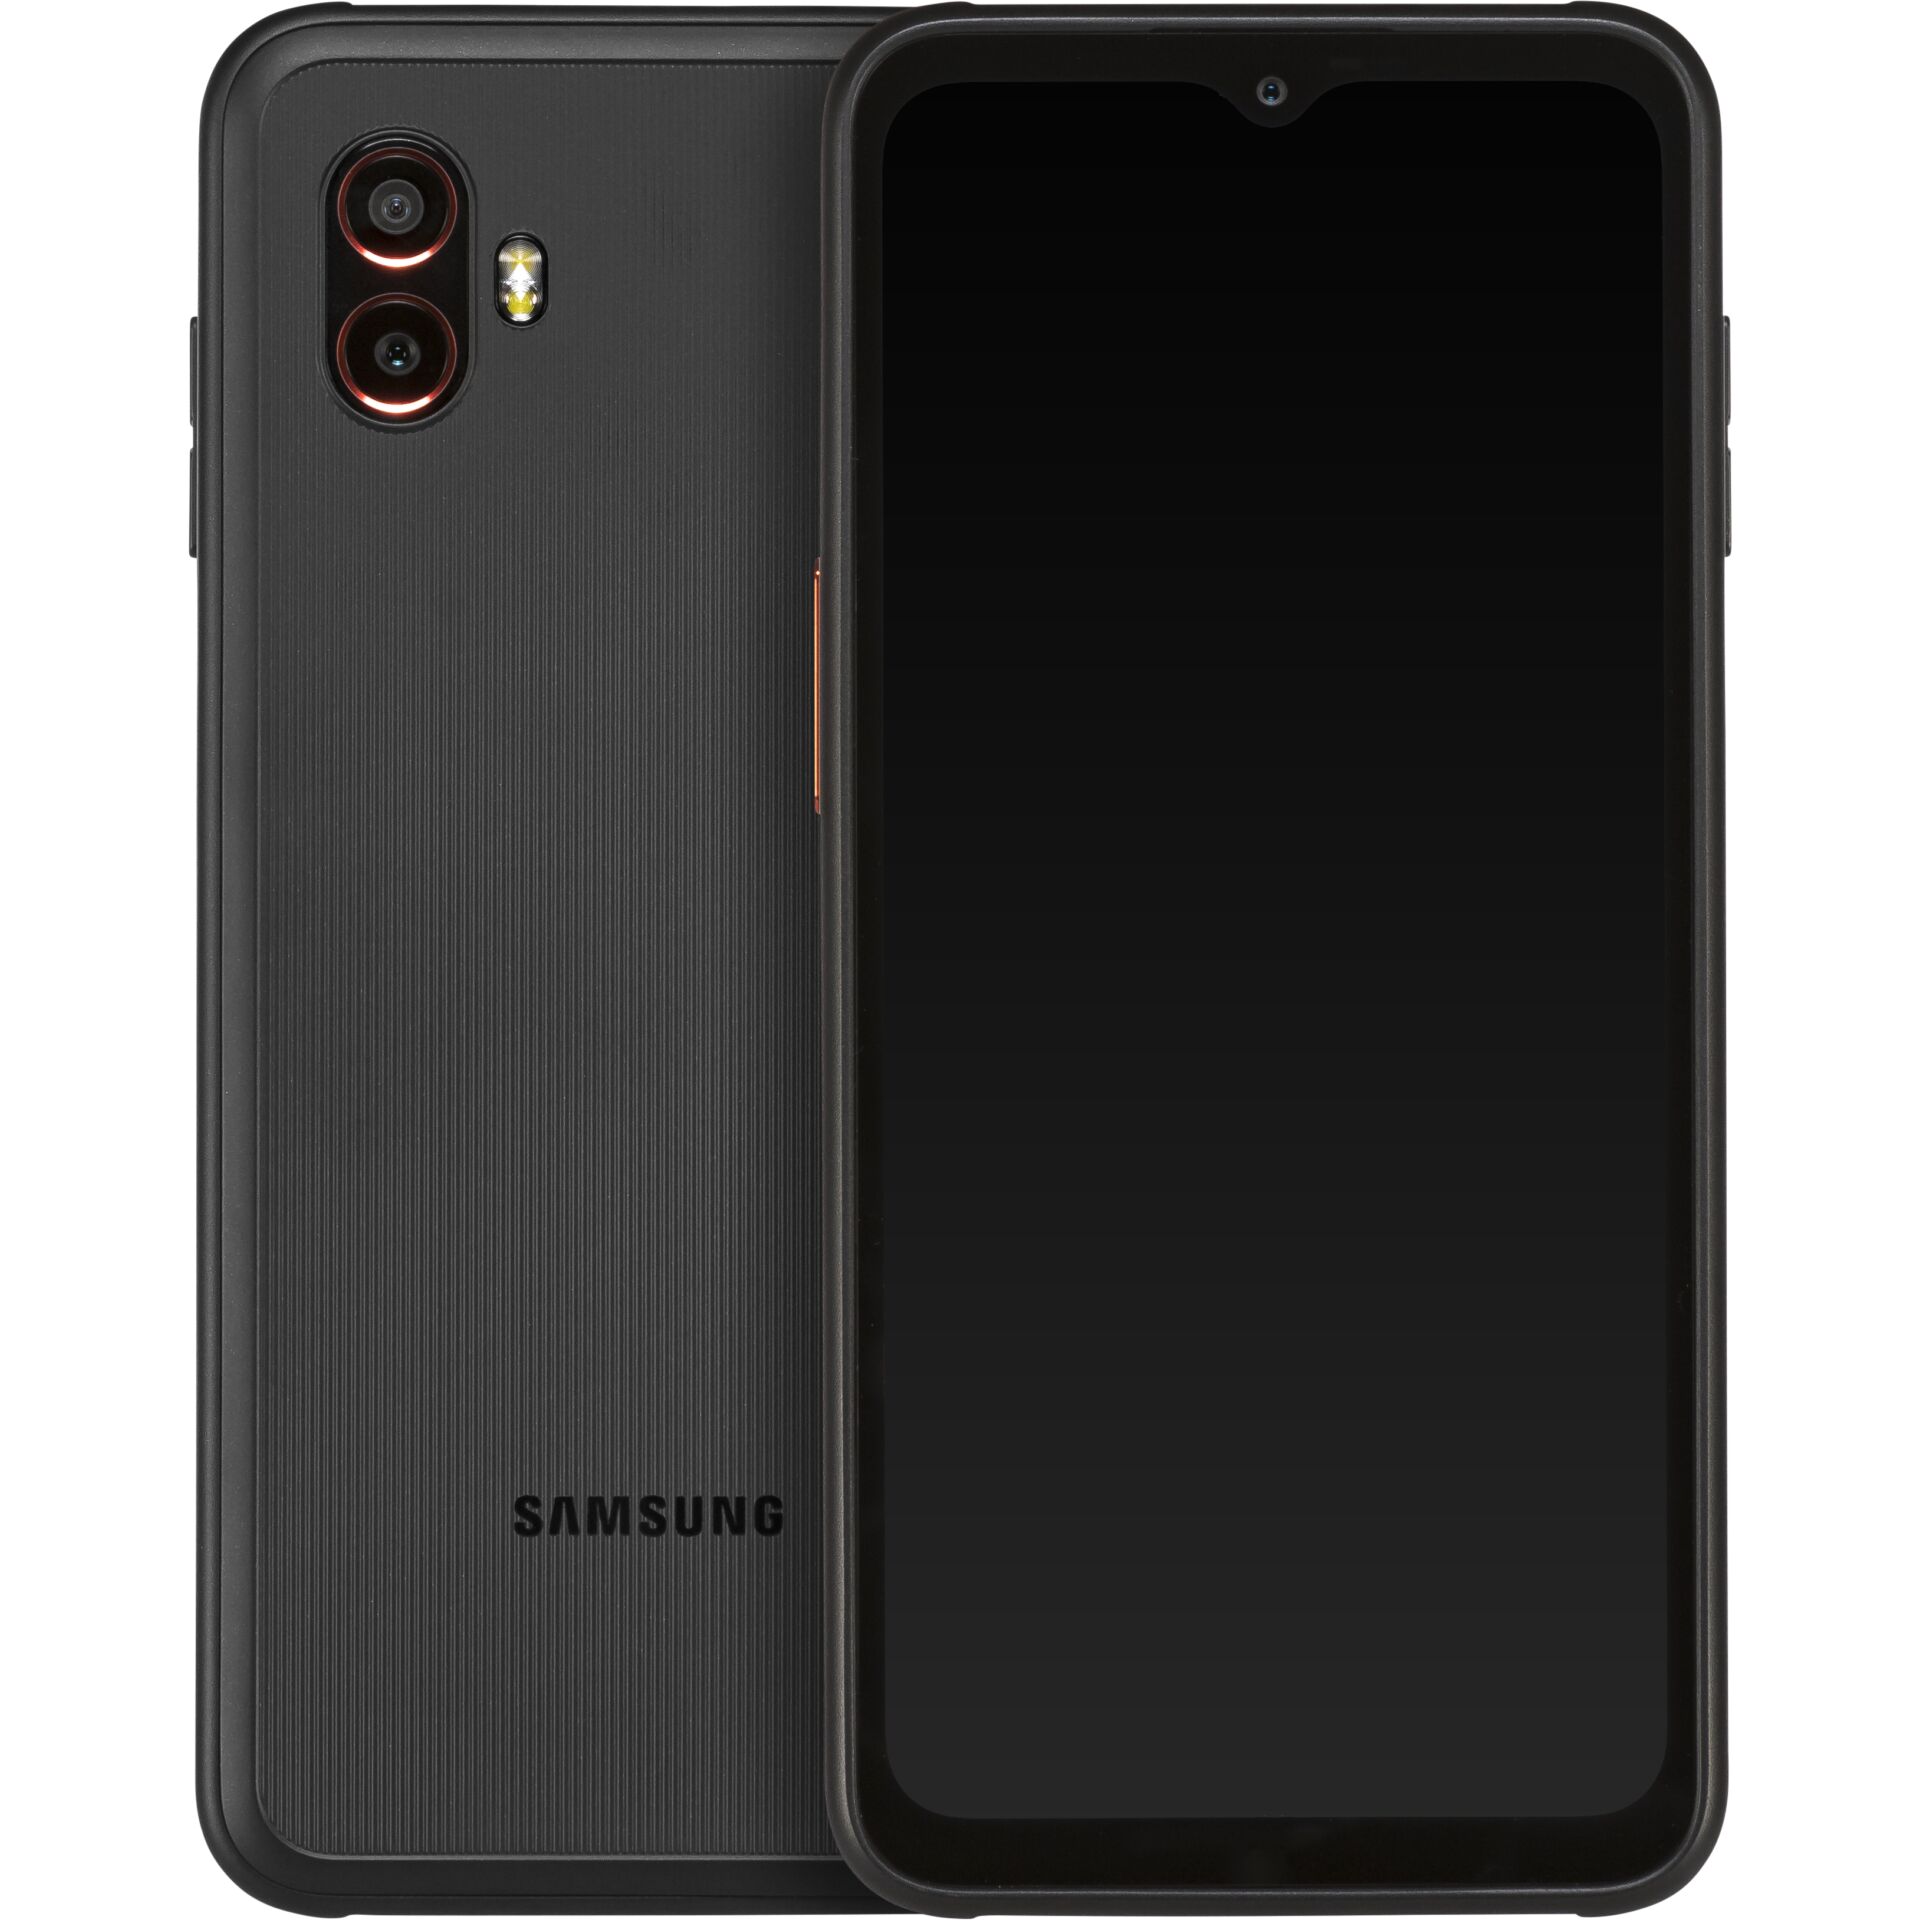 Samsung Galaxy Xcover 6 Pro Enterprise Edition G736B/DS schwarz, 6.6 Zoll, 50.0MP, 6GB, 128GB, Android Smartphone